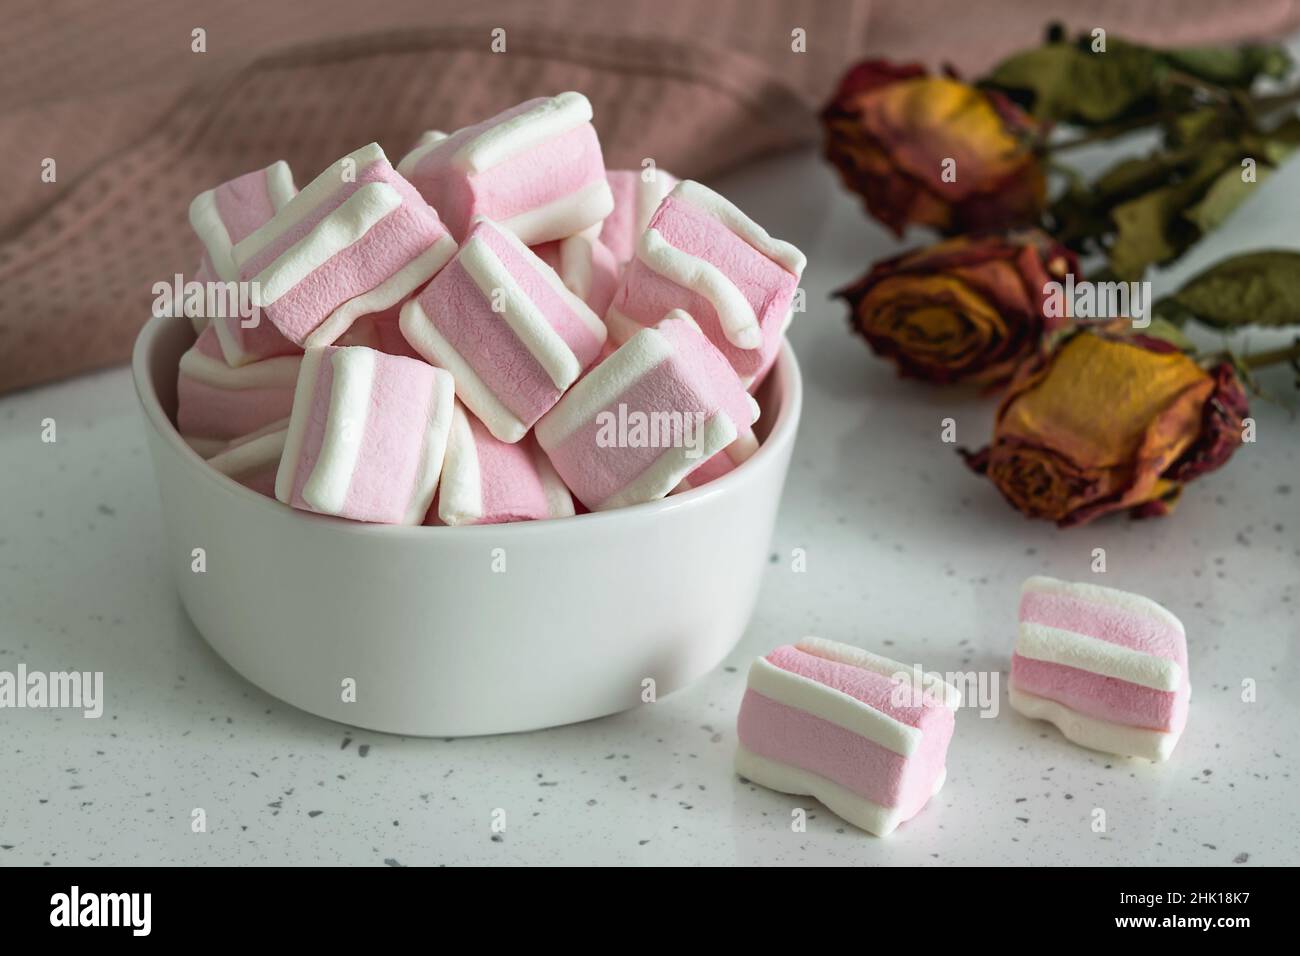 White-pink marshmallow on a light table next to a bouquet of wild field dried flowers. Sweets for tea and coffee on a porcelain plate. Horizontal phot Stock Photo